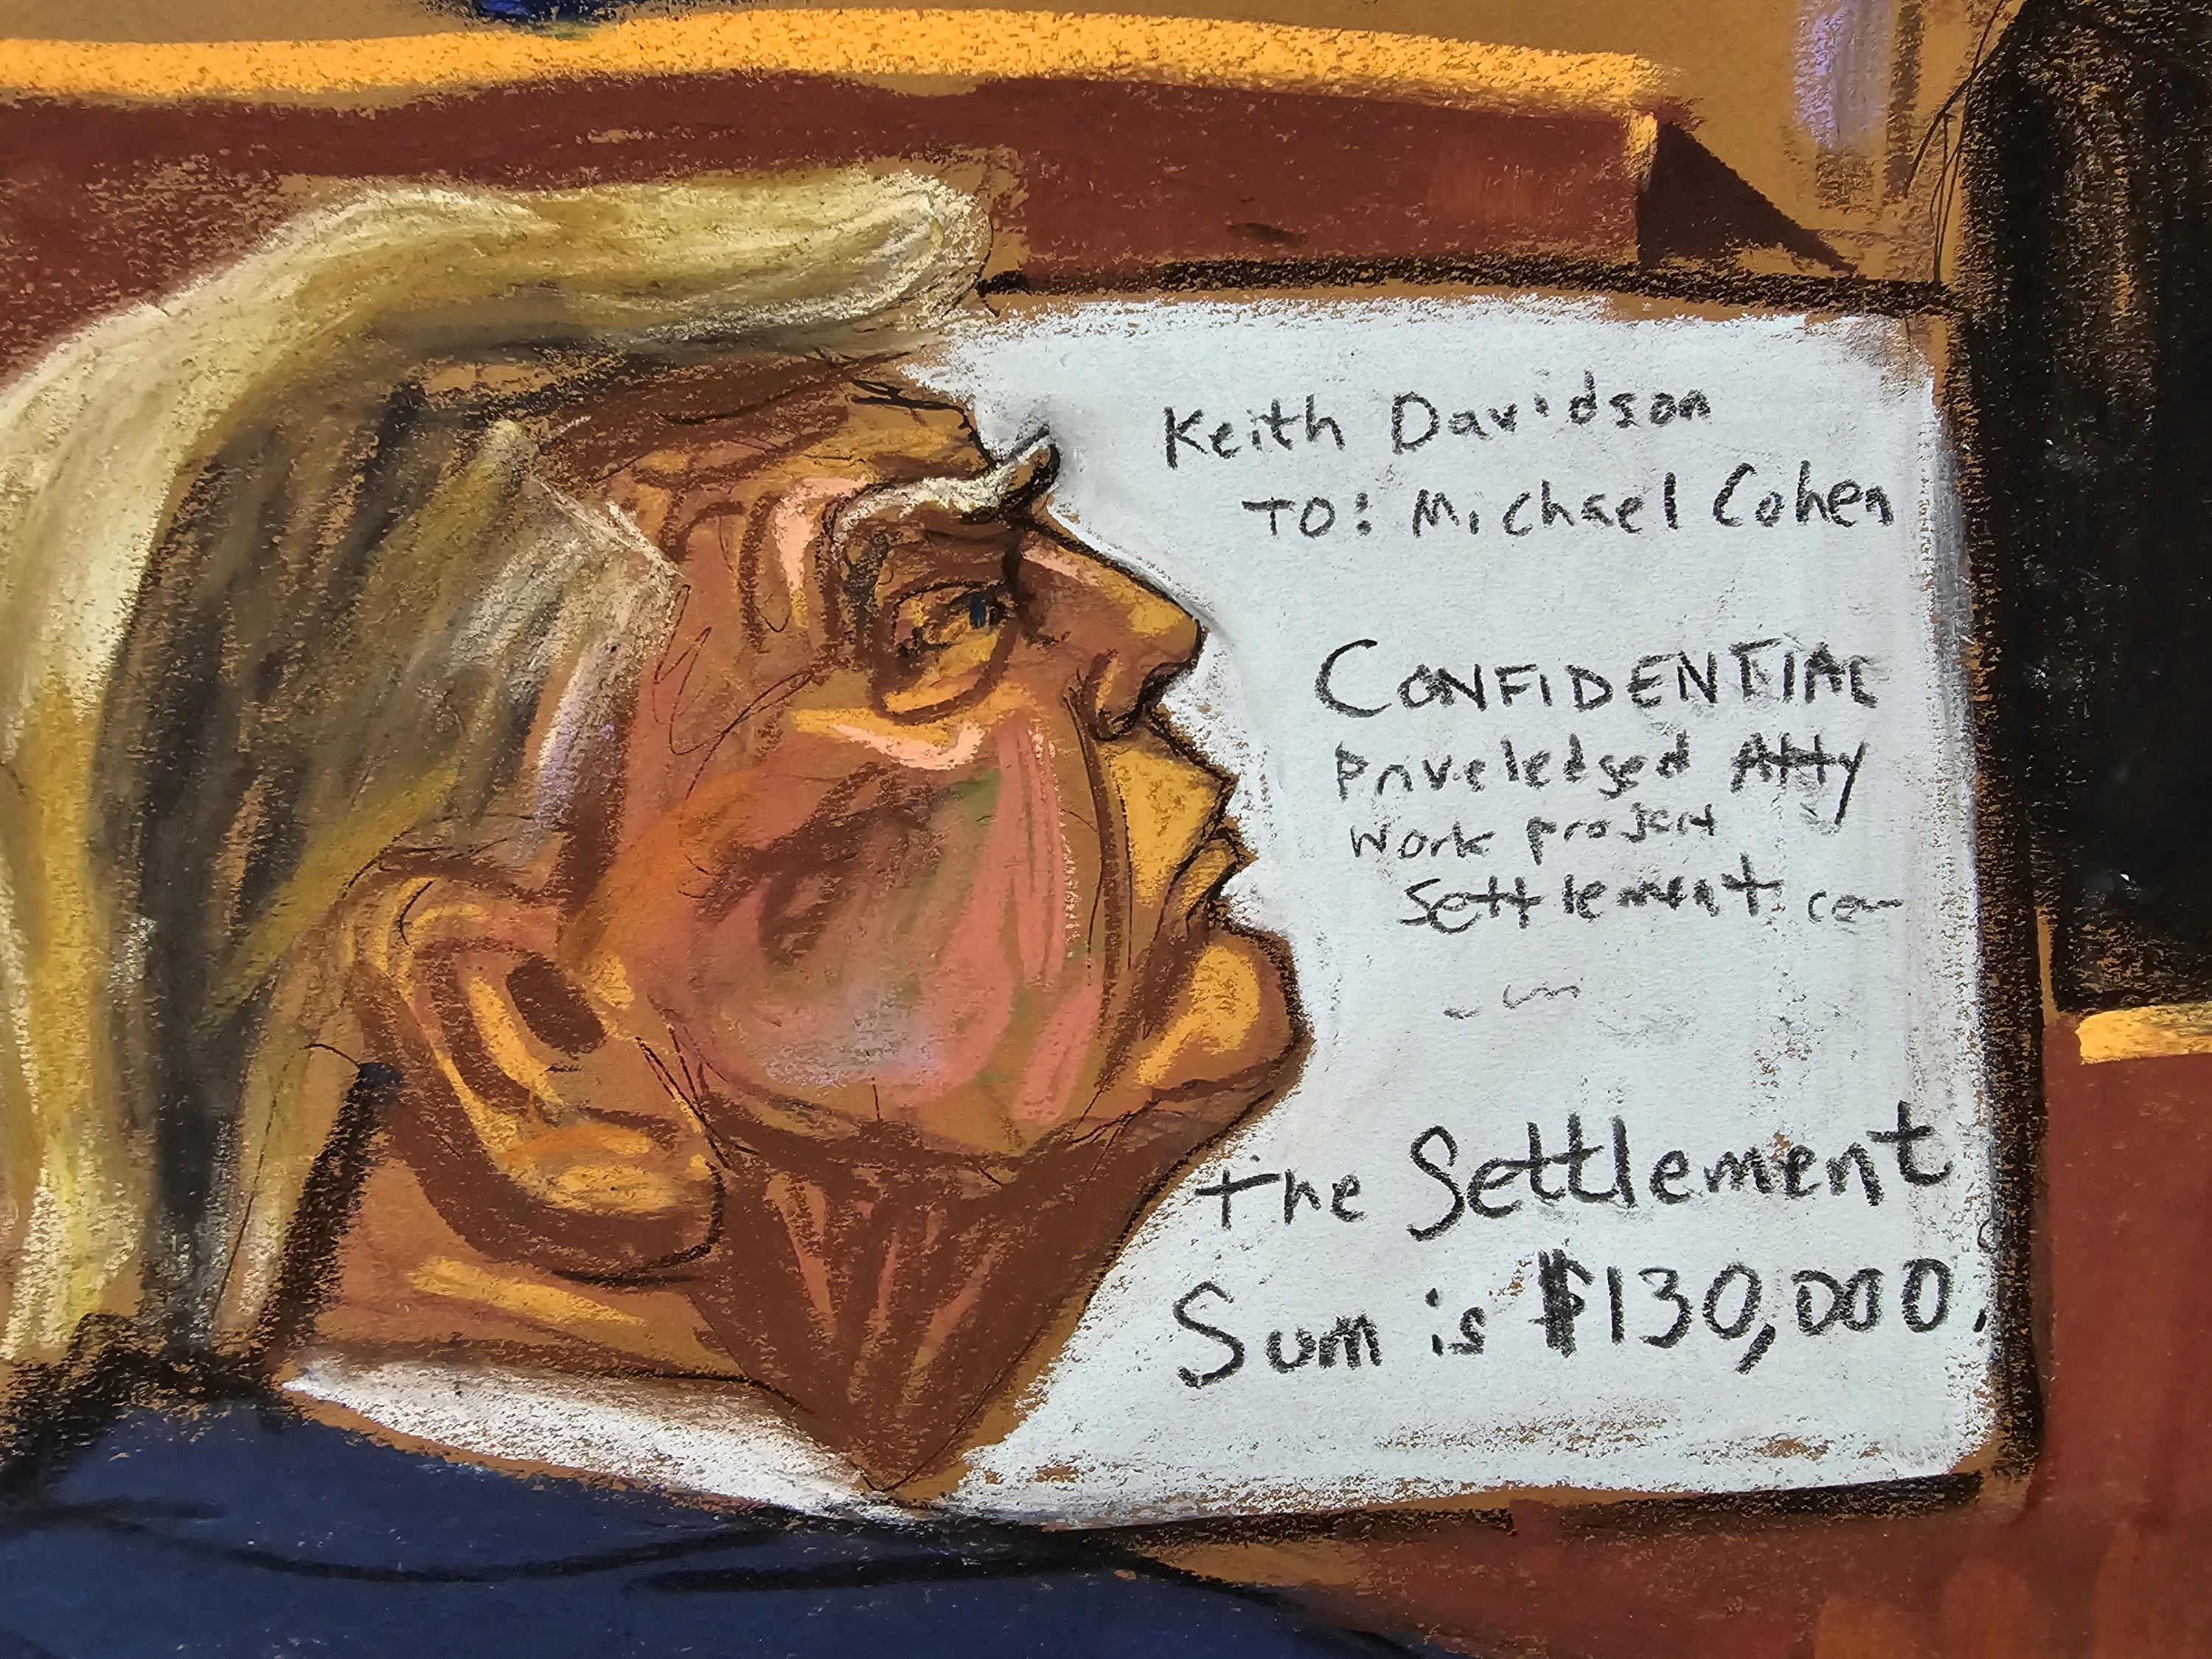 Donald Trump seen in court sketch during hush money trial in New York